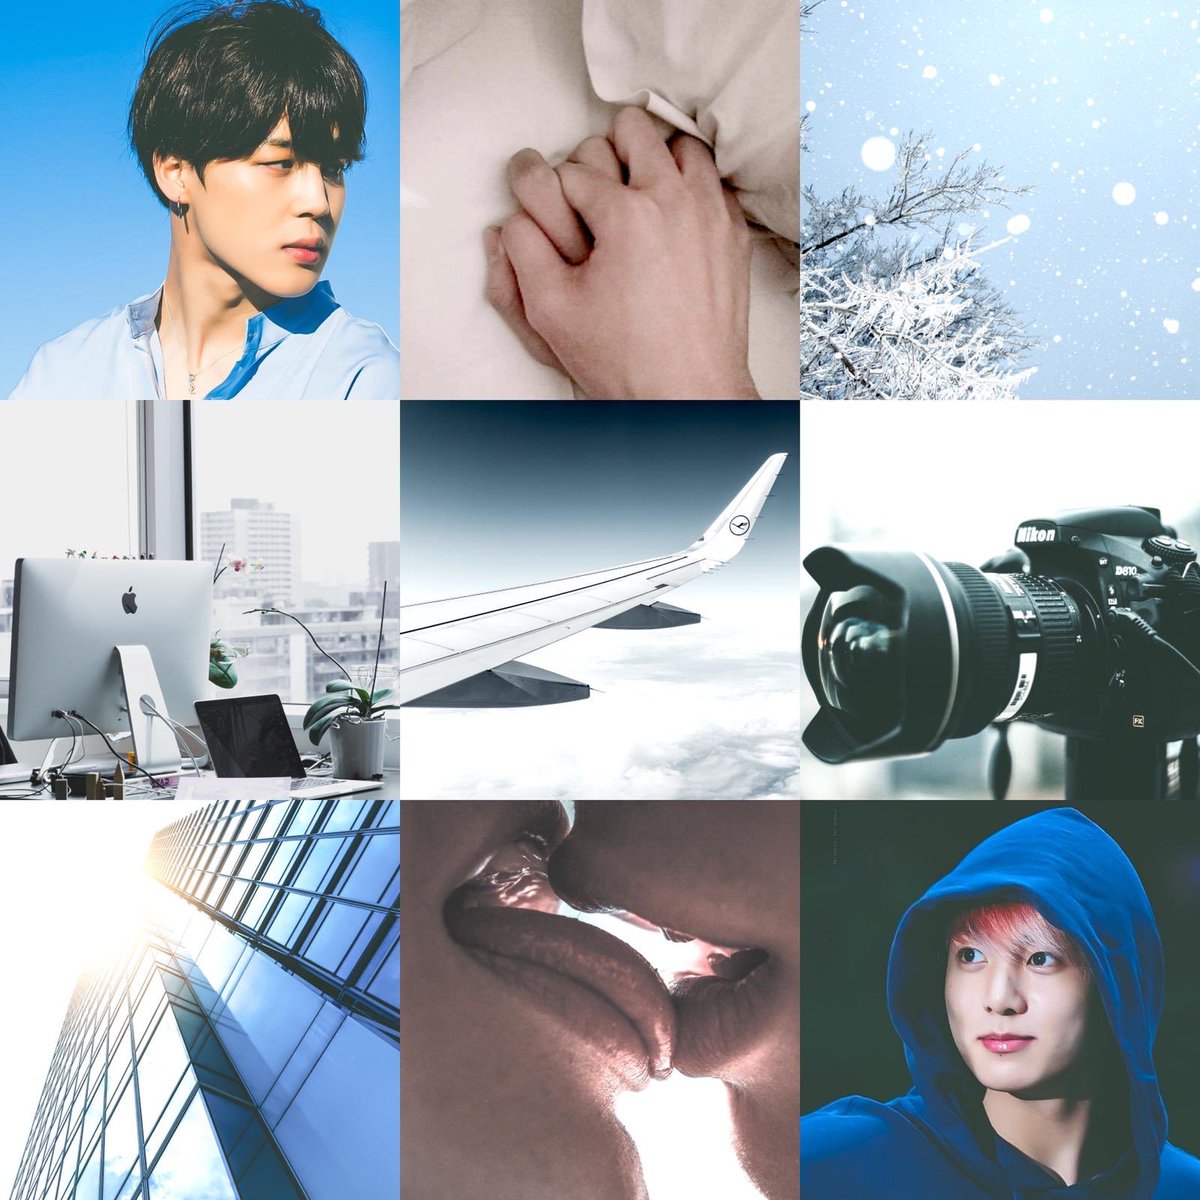 ✾ the dreaming of escape ✾ https://archiveofourown.org/works/22393810/chapters/53503312•jikook/kookmin•114k, complete •photographer!jk, ceo!jm•cherry kook and fluff everywhere